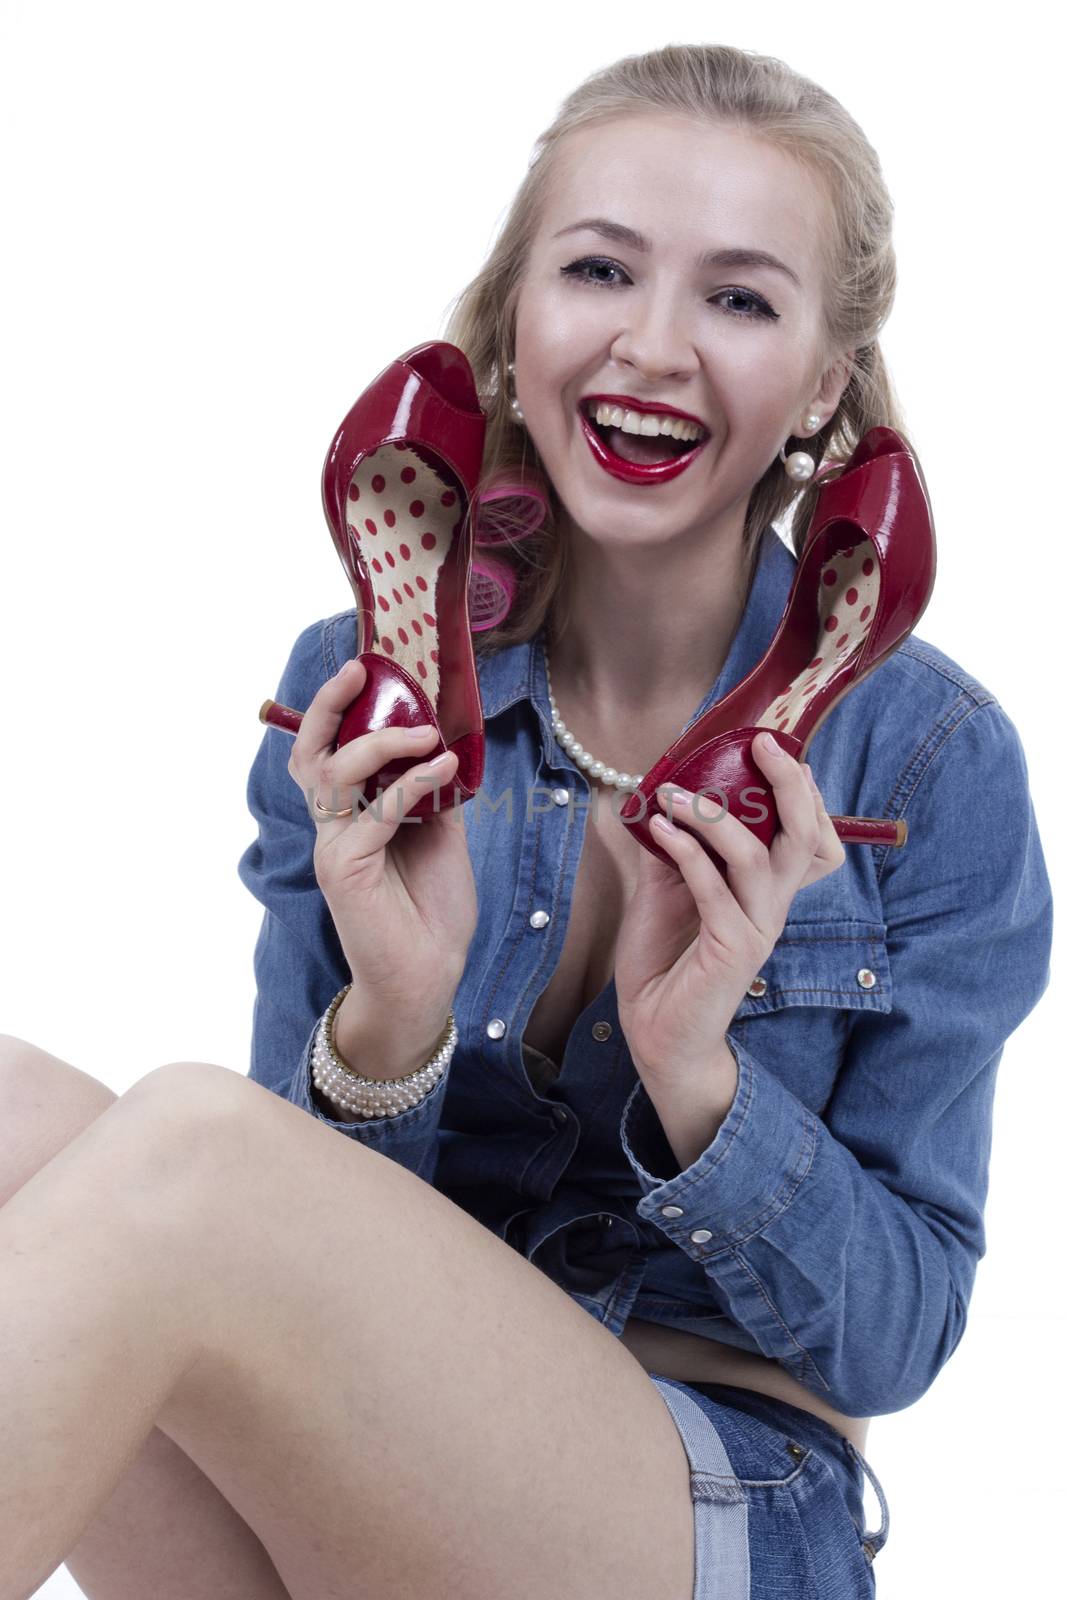 Portrait of a young blonde woman with red shoes